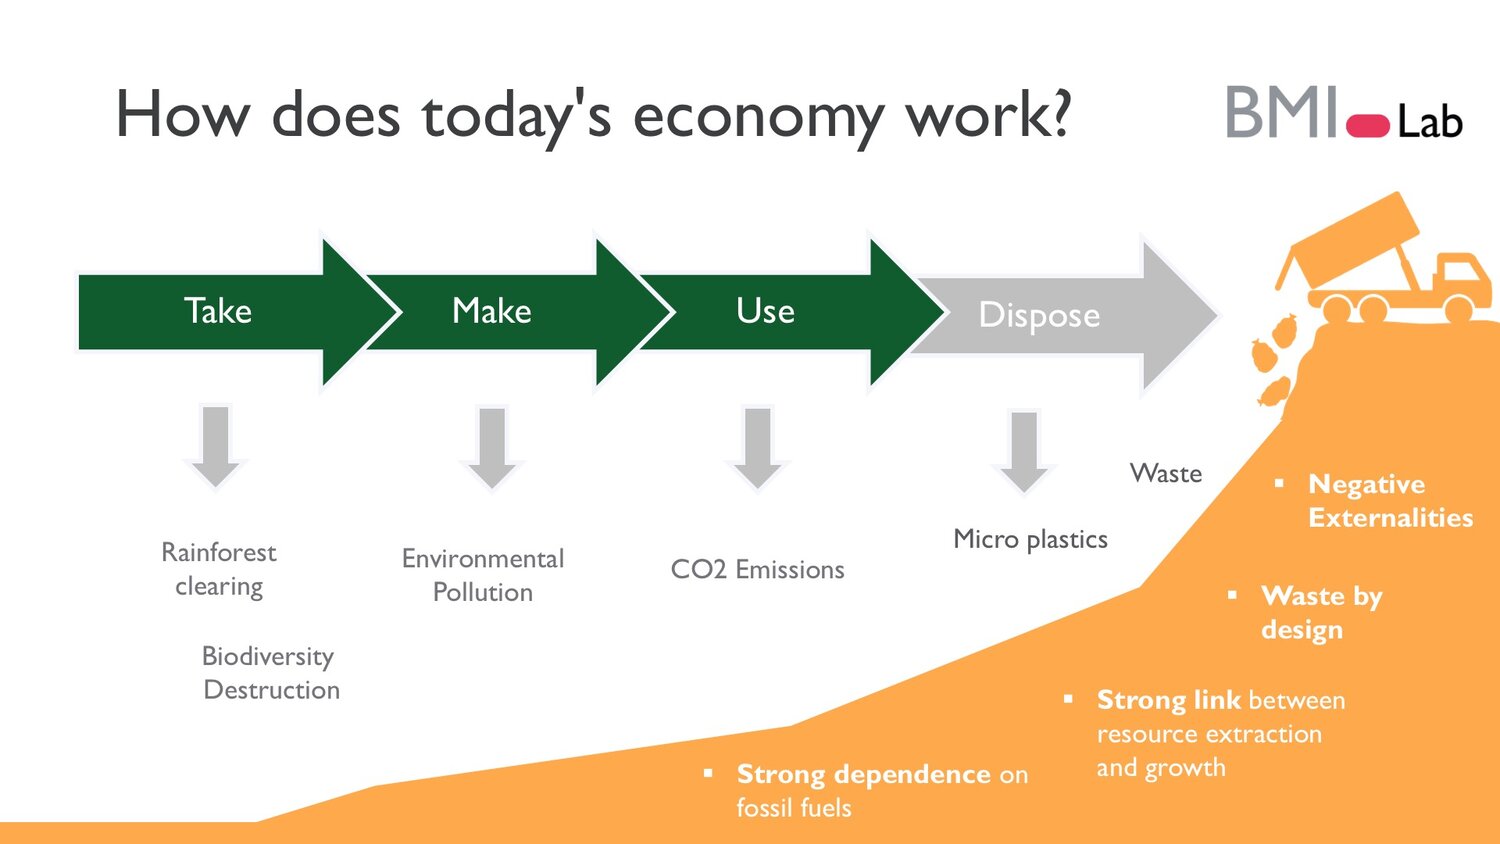 How-does-todays-economy-work-Circular-Business-Models-BMI_Lab.jpg